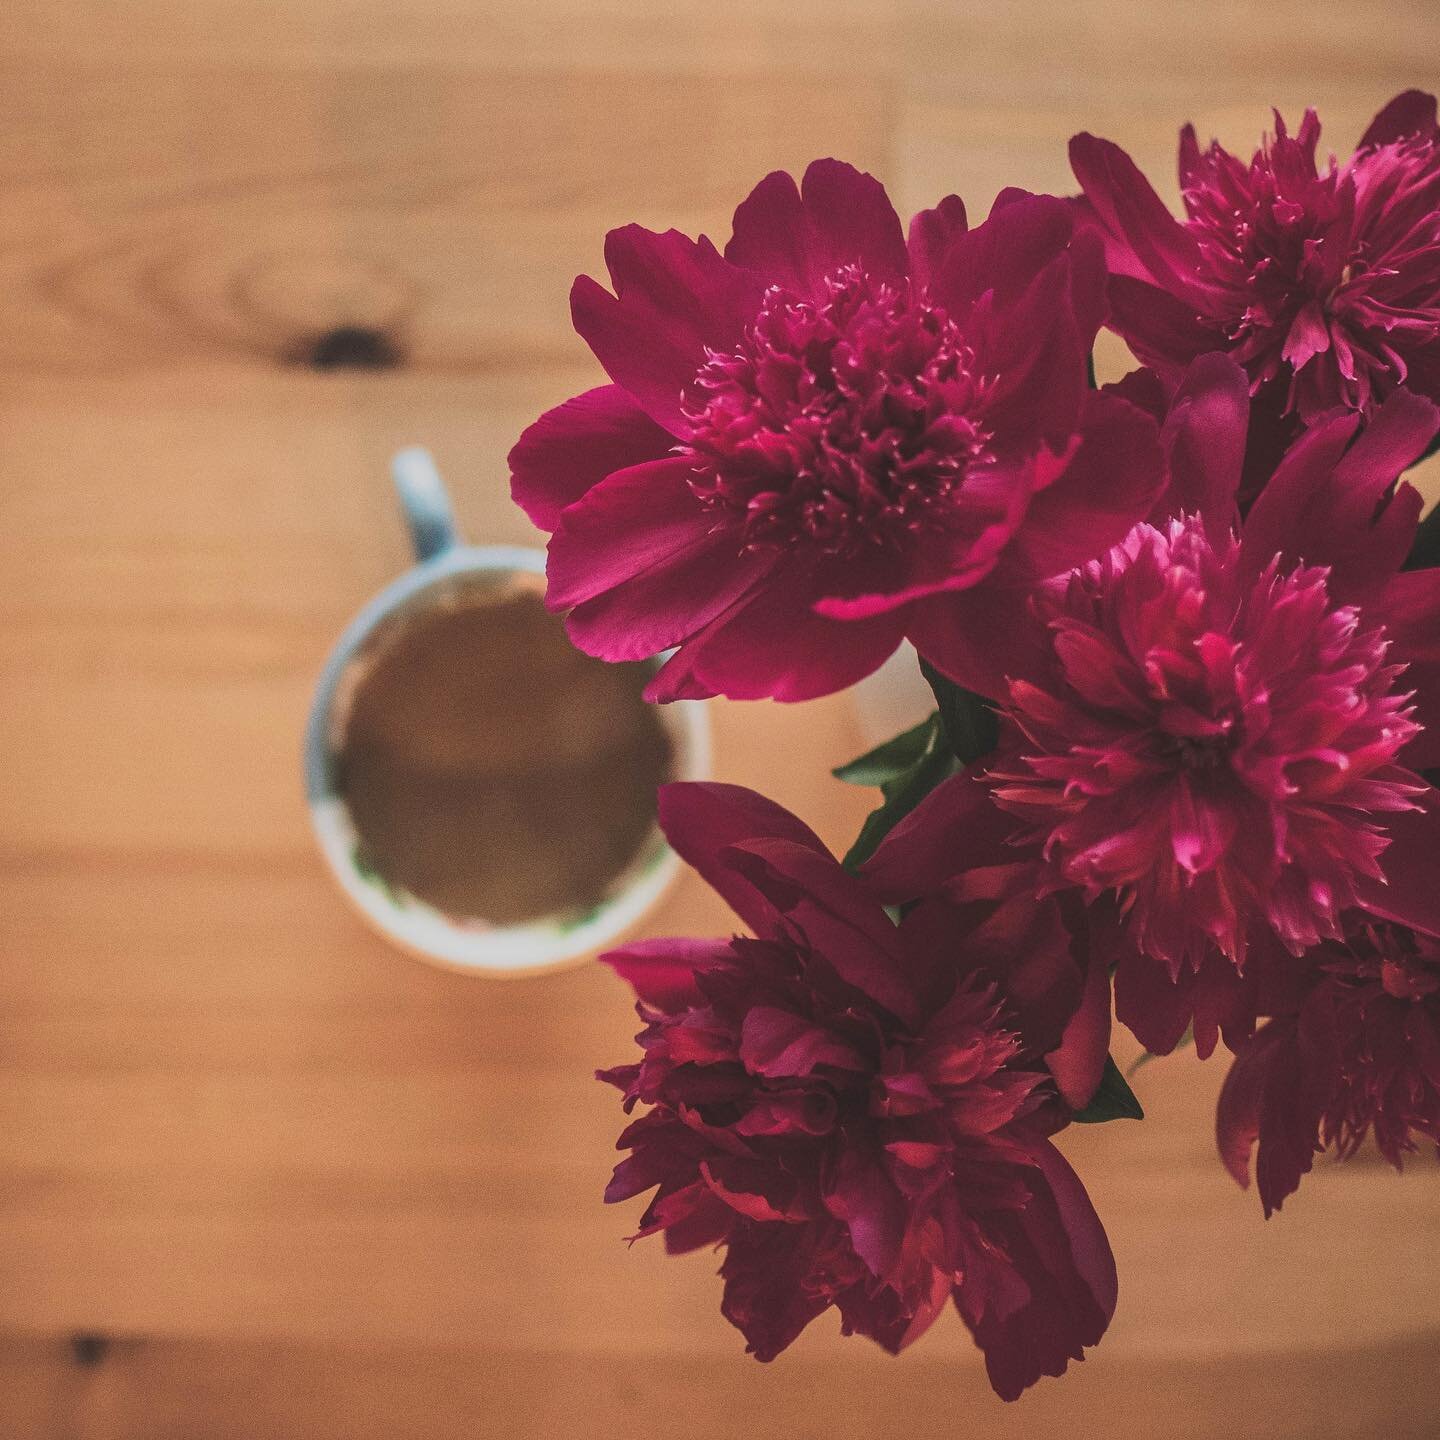 Drink a lot of coffee, pretend to know what I&rsquo;m doing. .
.
.
.
#peony #coffee #coffee_inst #isitfridayyet #nottuesday